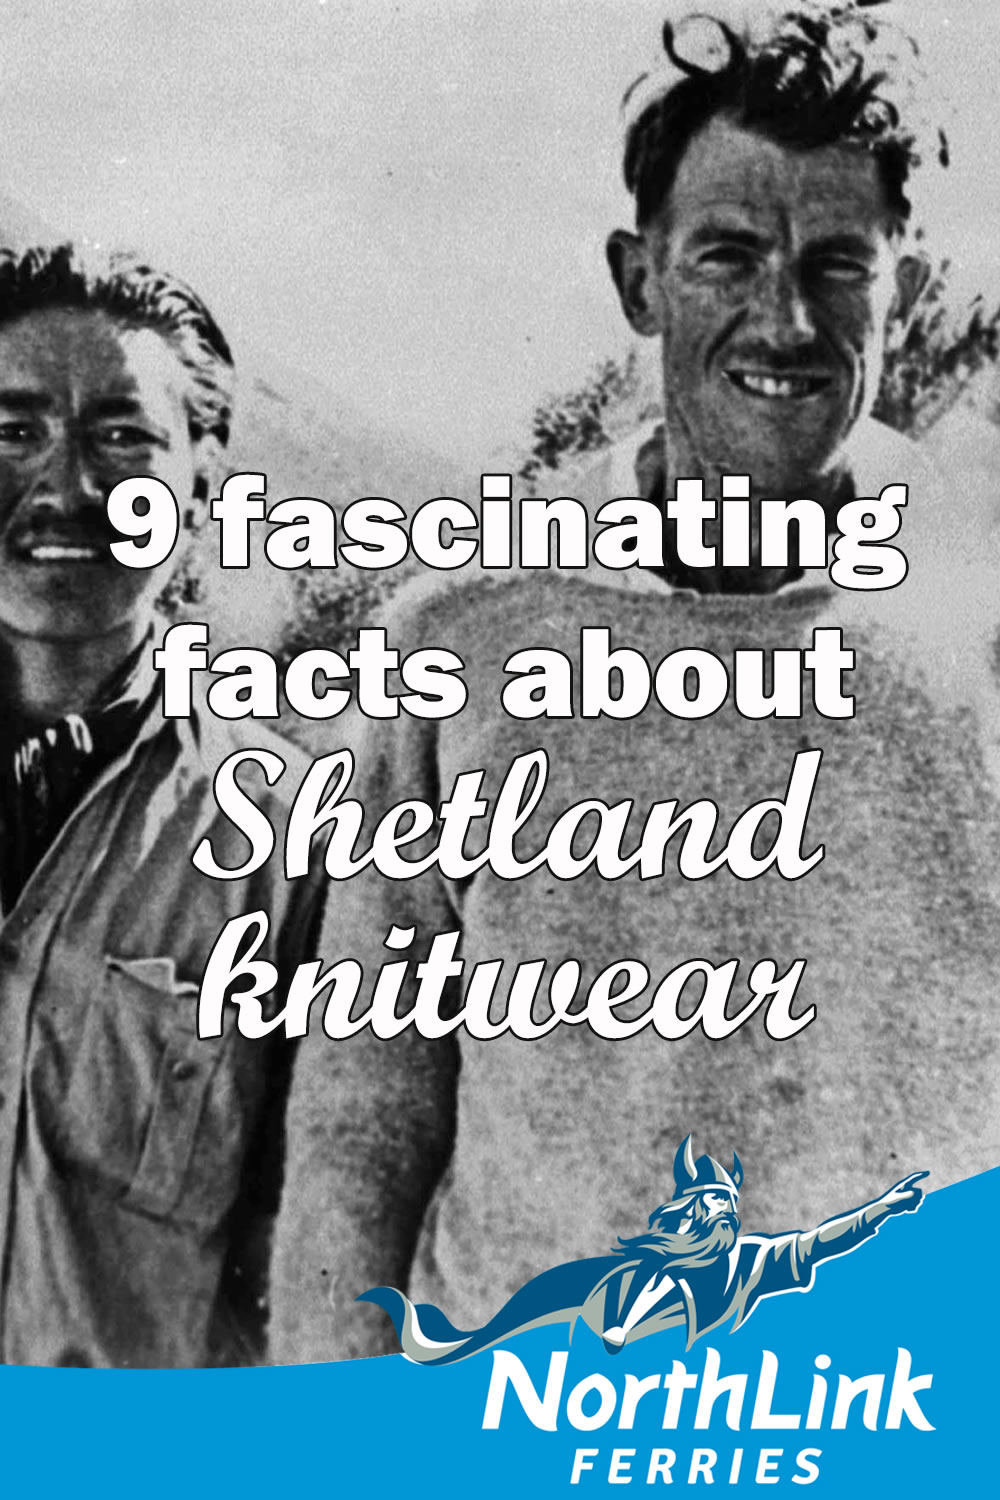 9 fascinating facts about Shetland knitwear